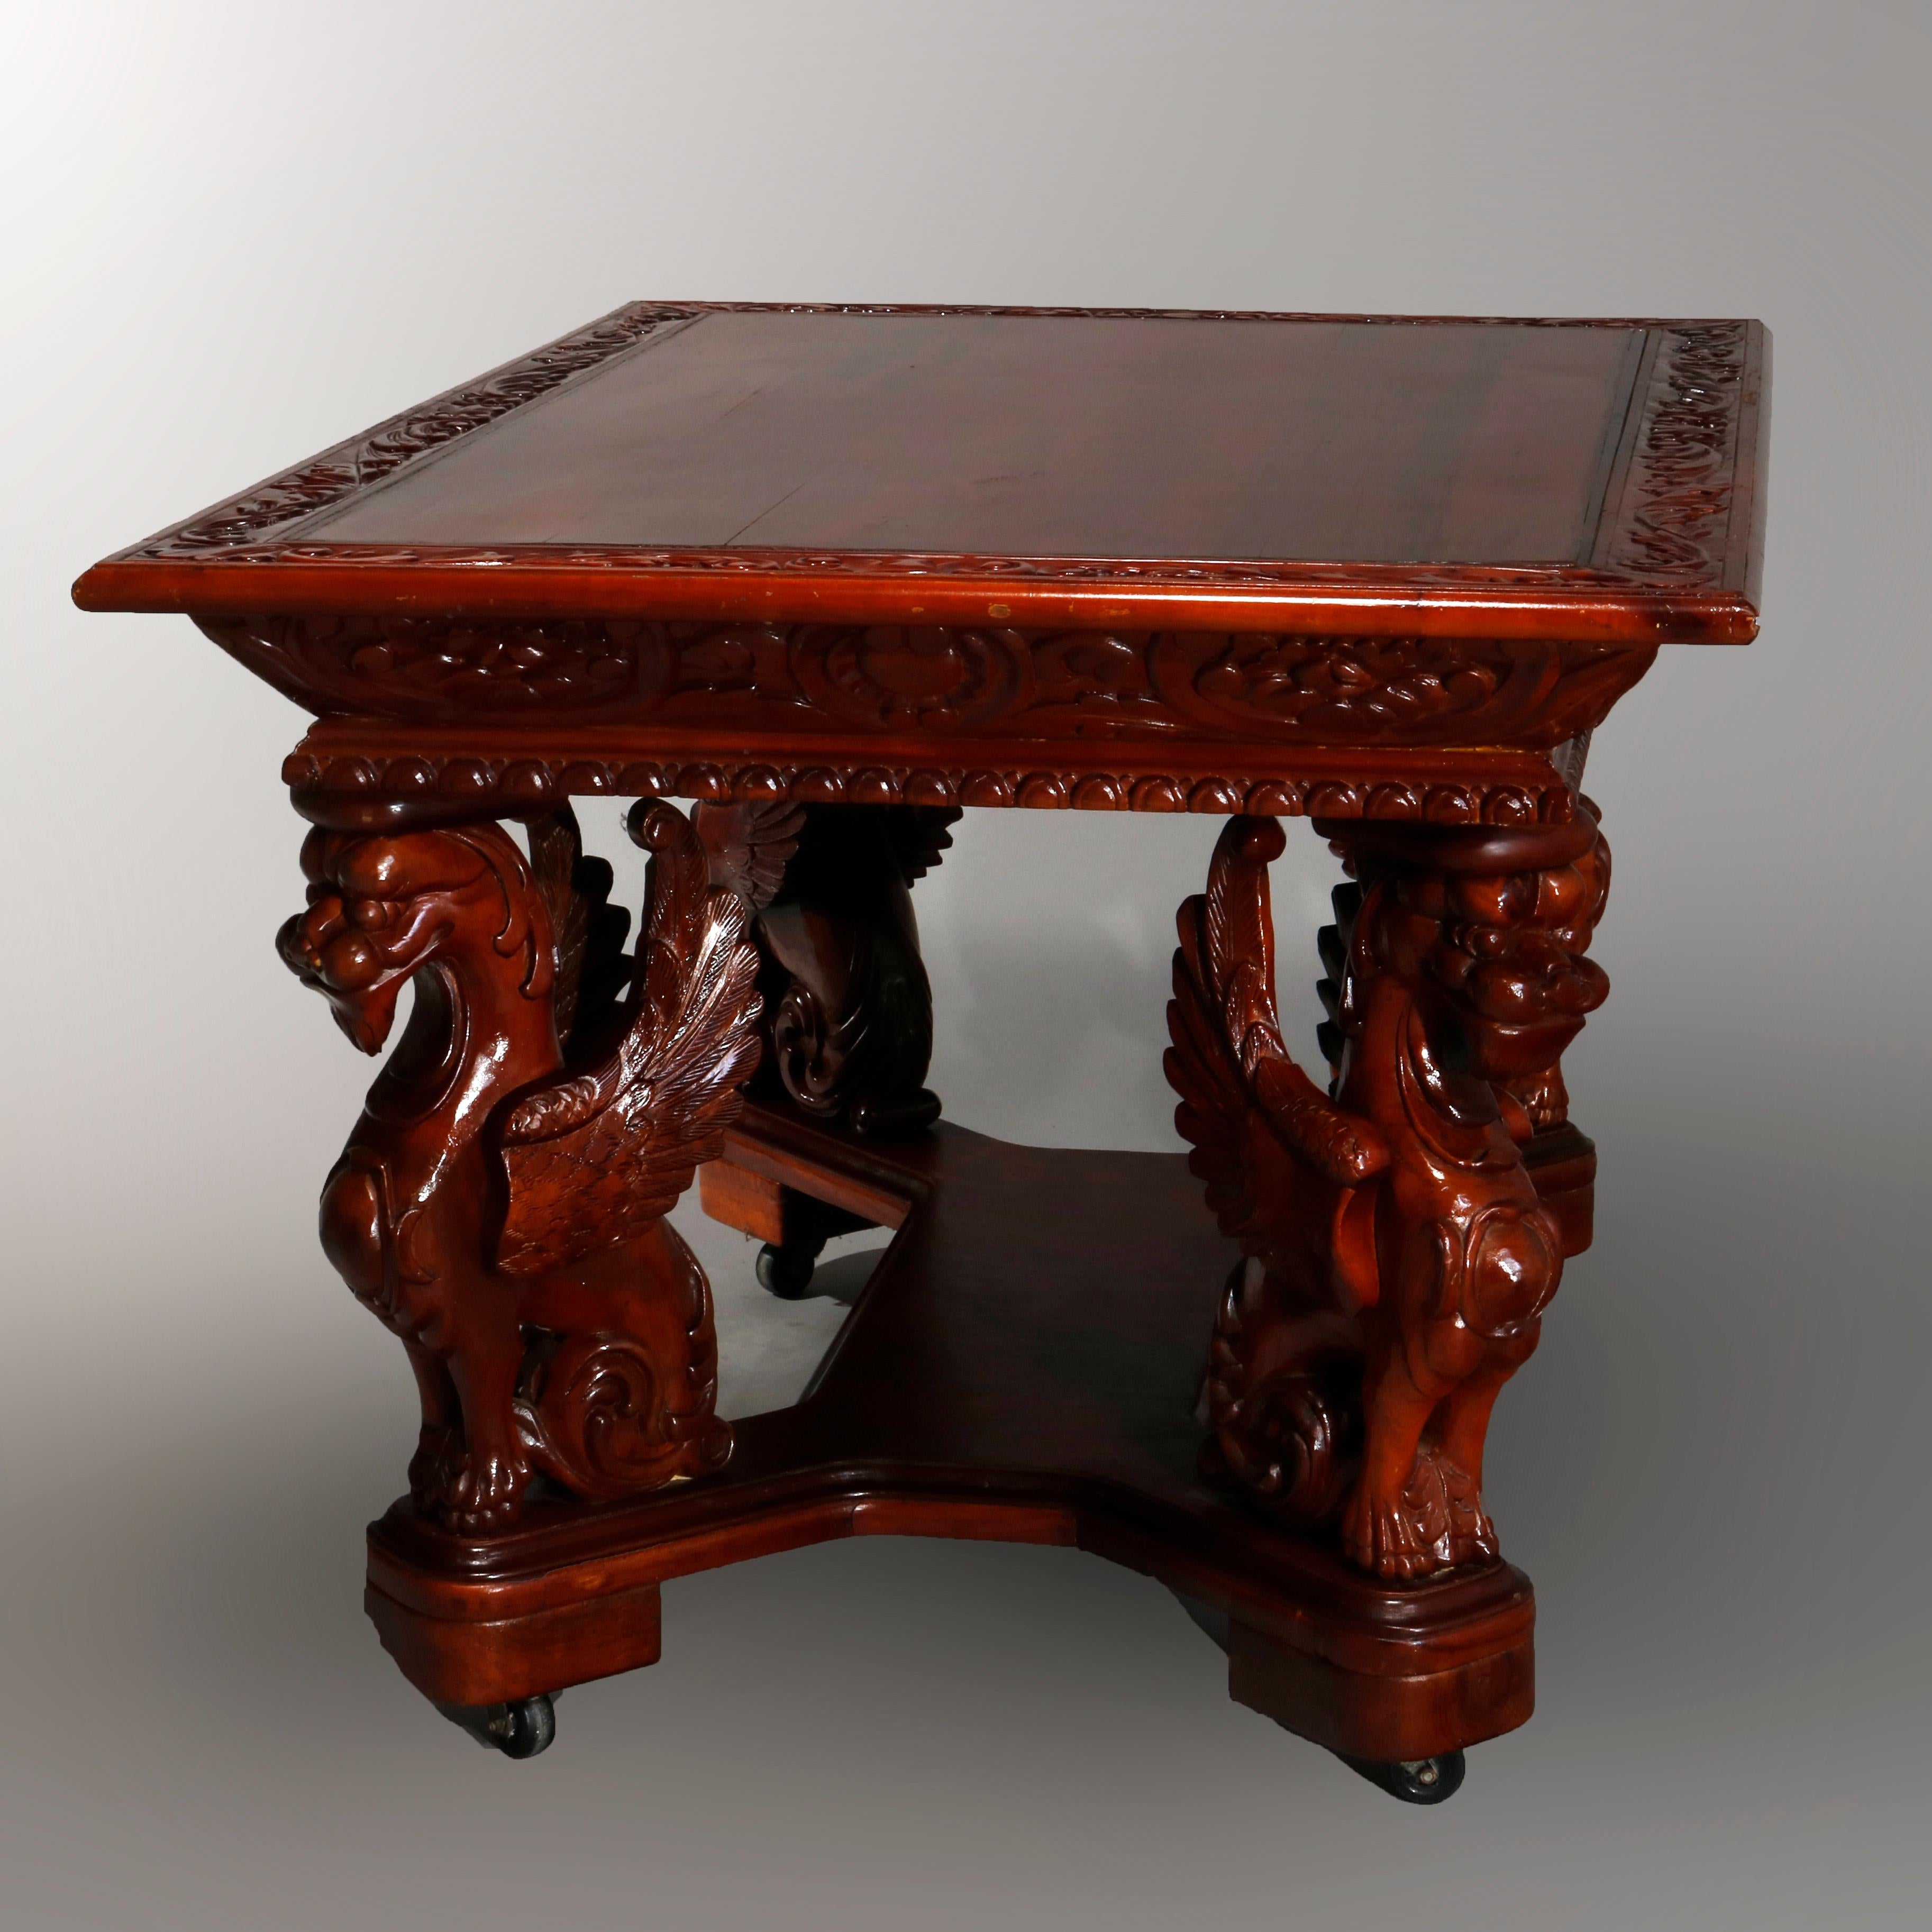 An antique Gothic figural library table offers mahogany construction with top having carved foliate bordering, deep skirt and raised on full sculptural griffin form legs with shaped lower shelf, 20th century


Measures: 31.75